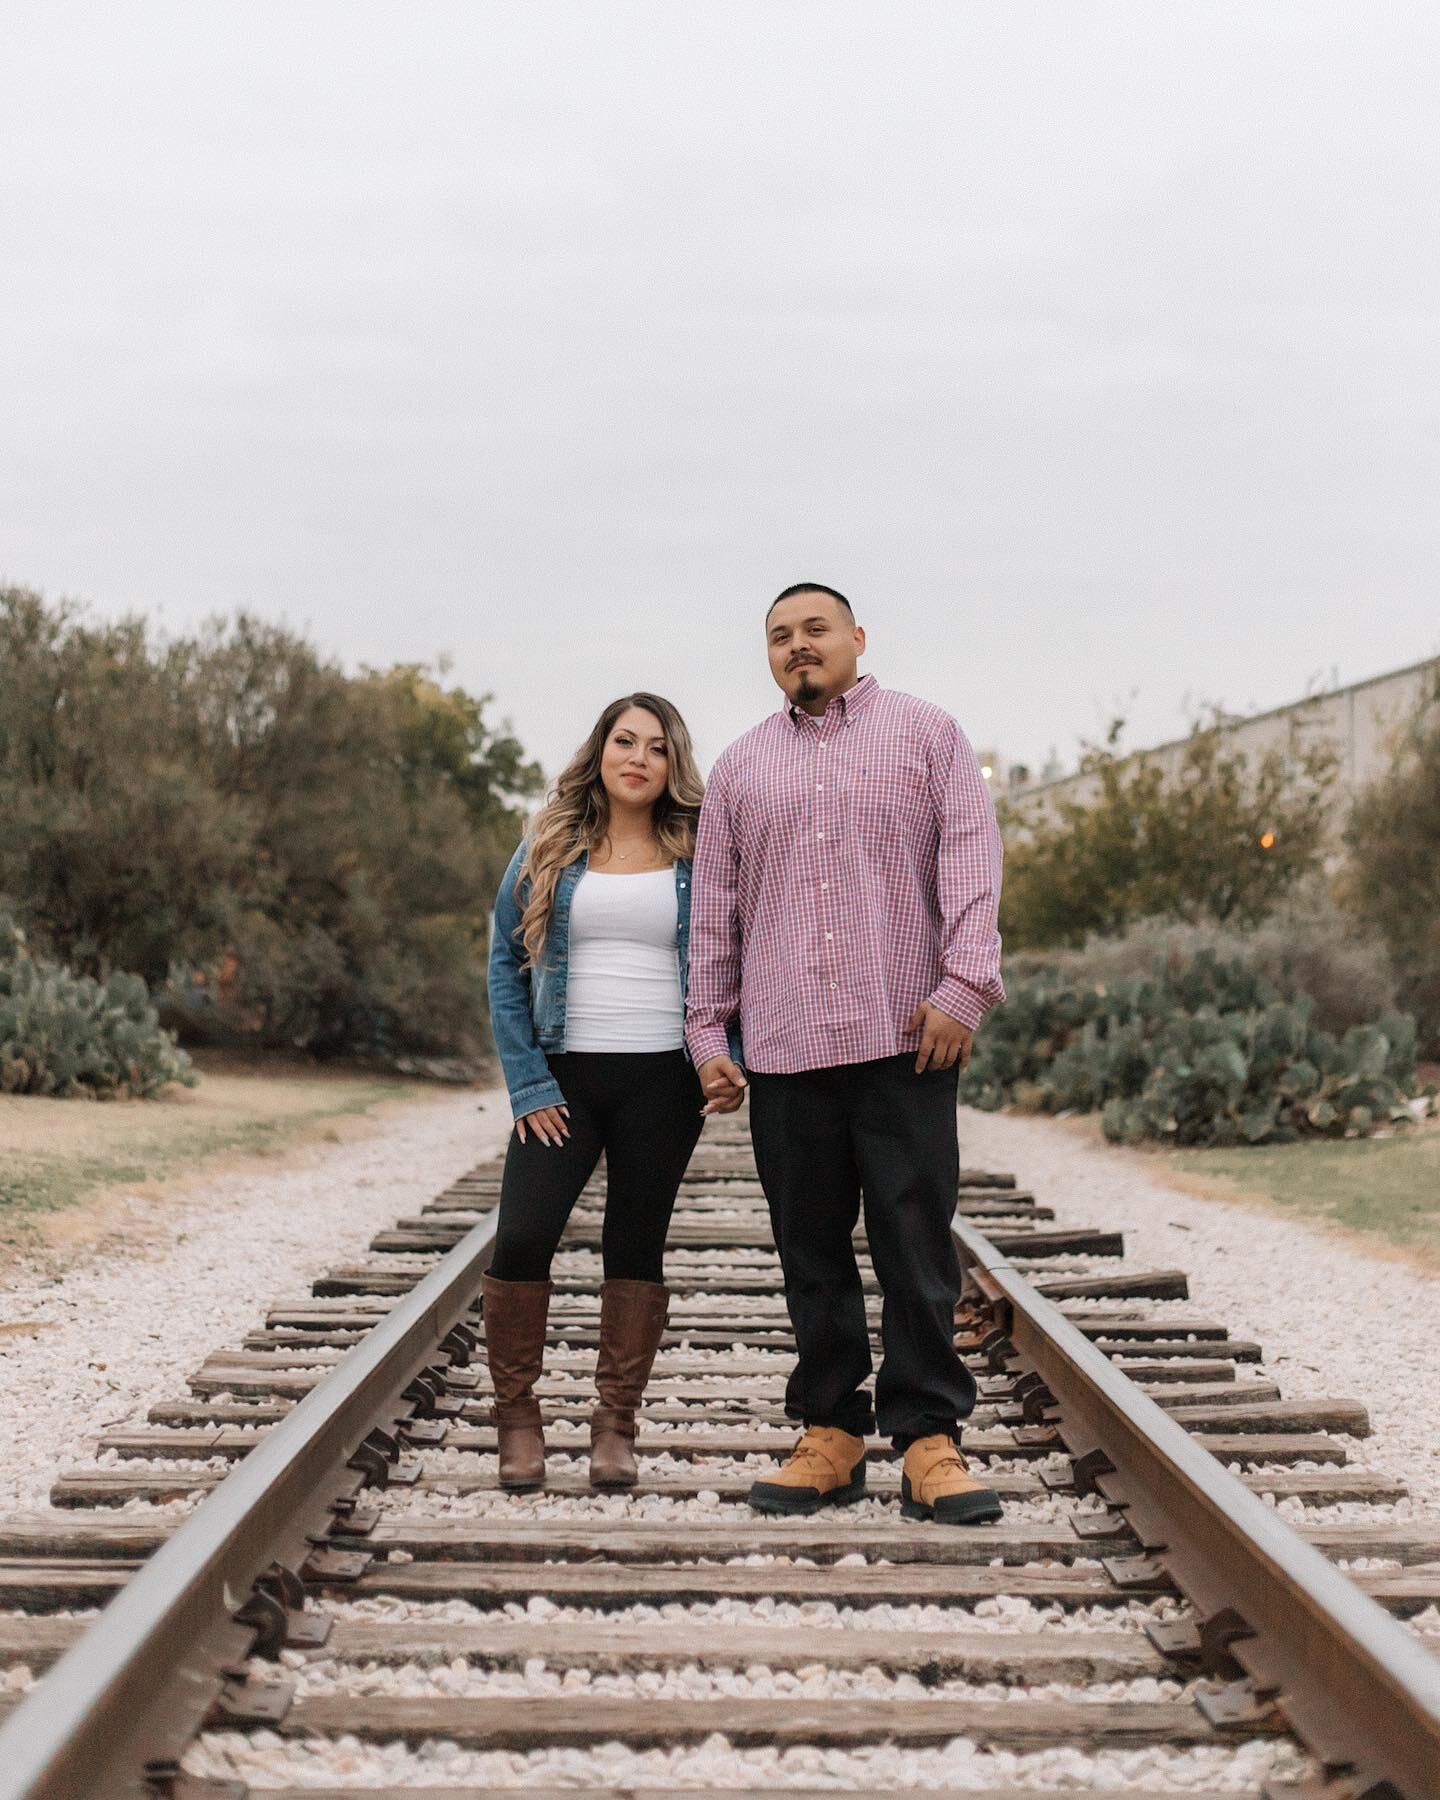 A lot of my sessions lately are with couples and families who haven&rsquo;t had photos taken ever! I&rsquo;ll say it again y&rsquo;all, your memories need to be captured! That being said, happy engagement @gissel.julian 💍🥰 #lavidaveraphoto

Click t